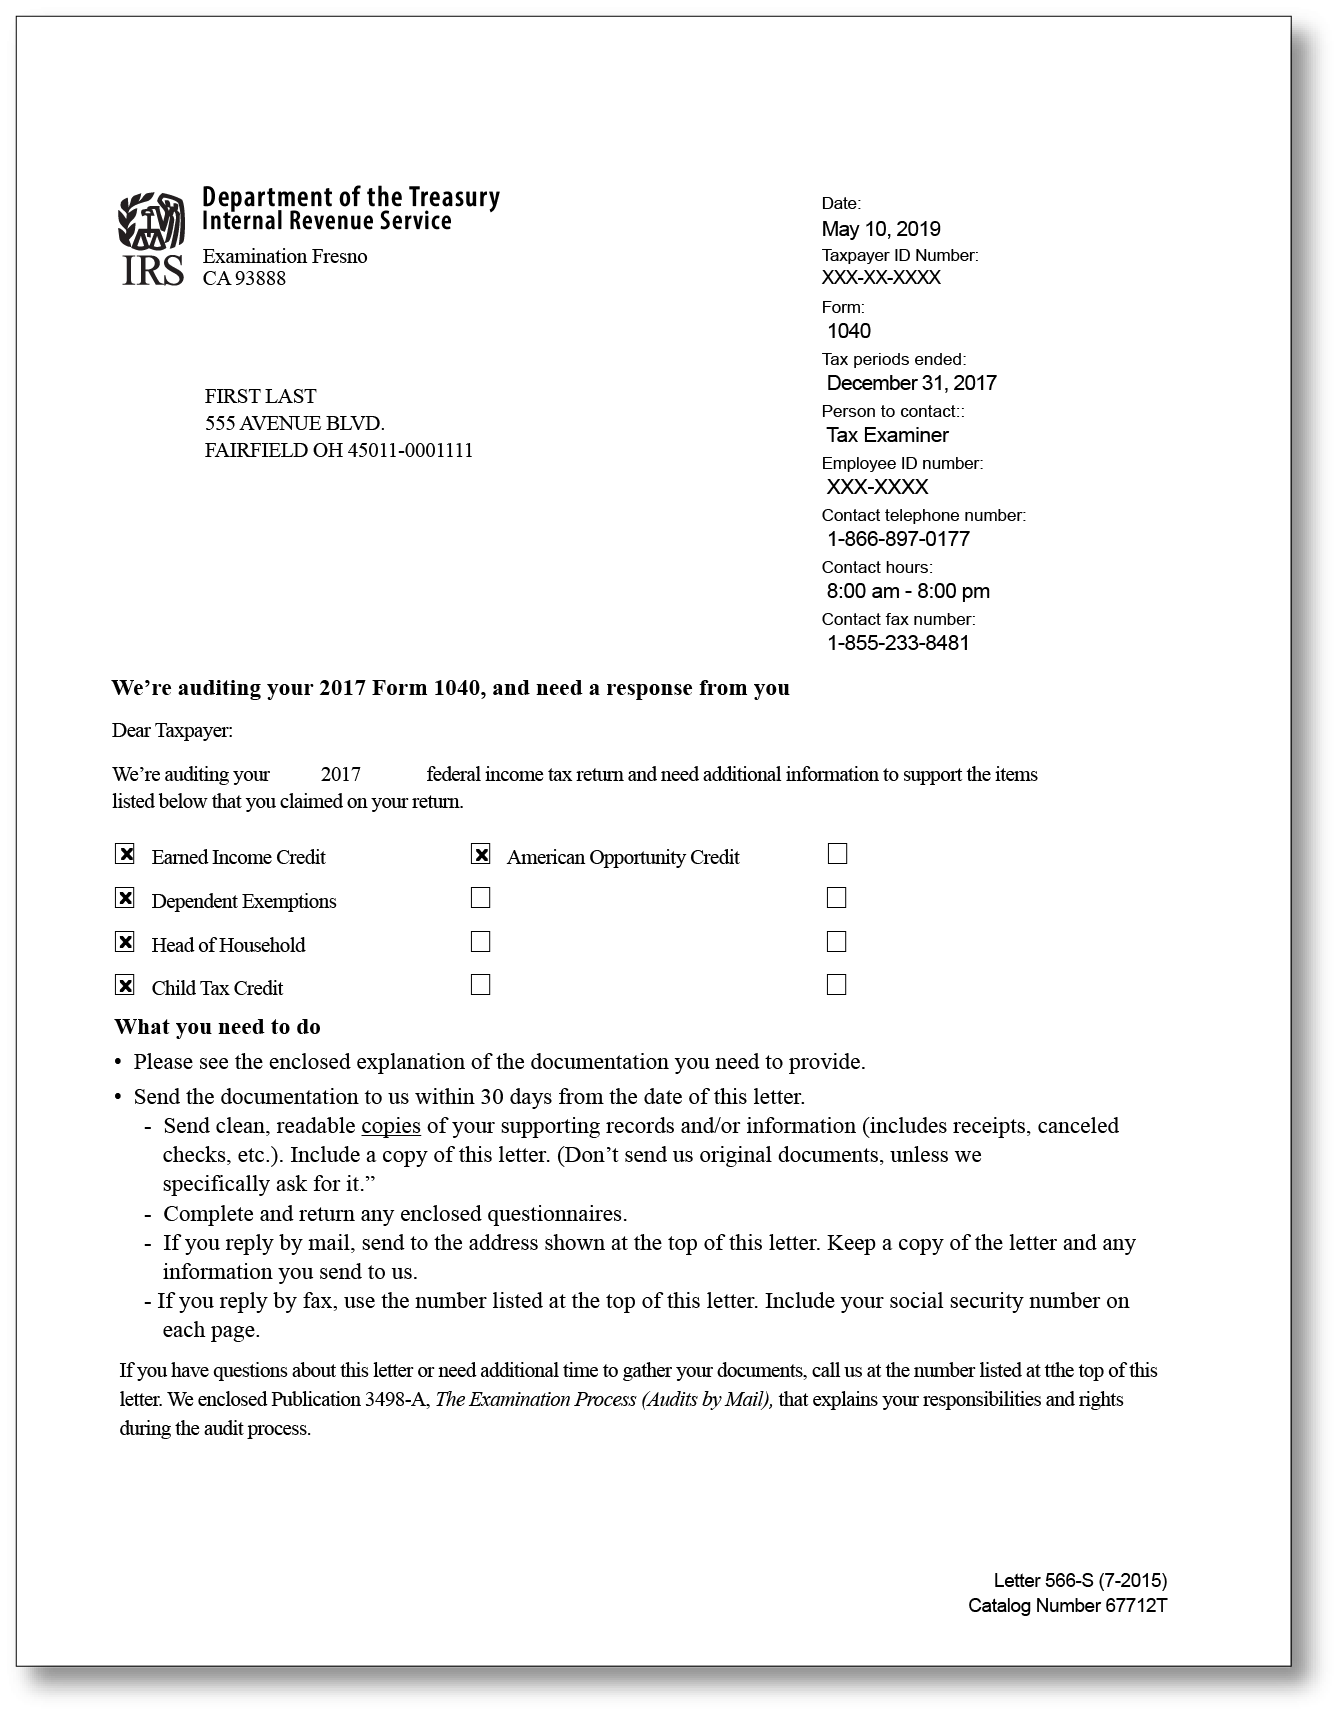 IRS Audit Letter 221-S – Sample 21 Intended For Irs Response Letter Template